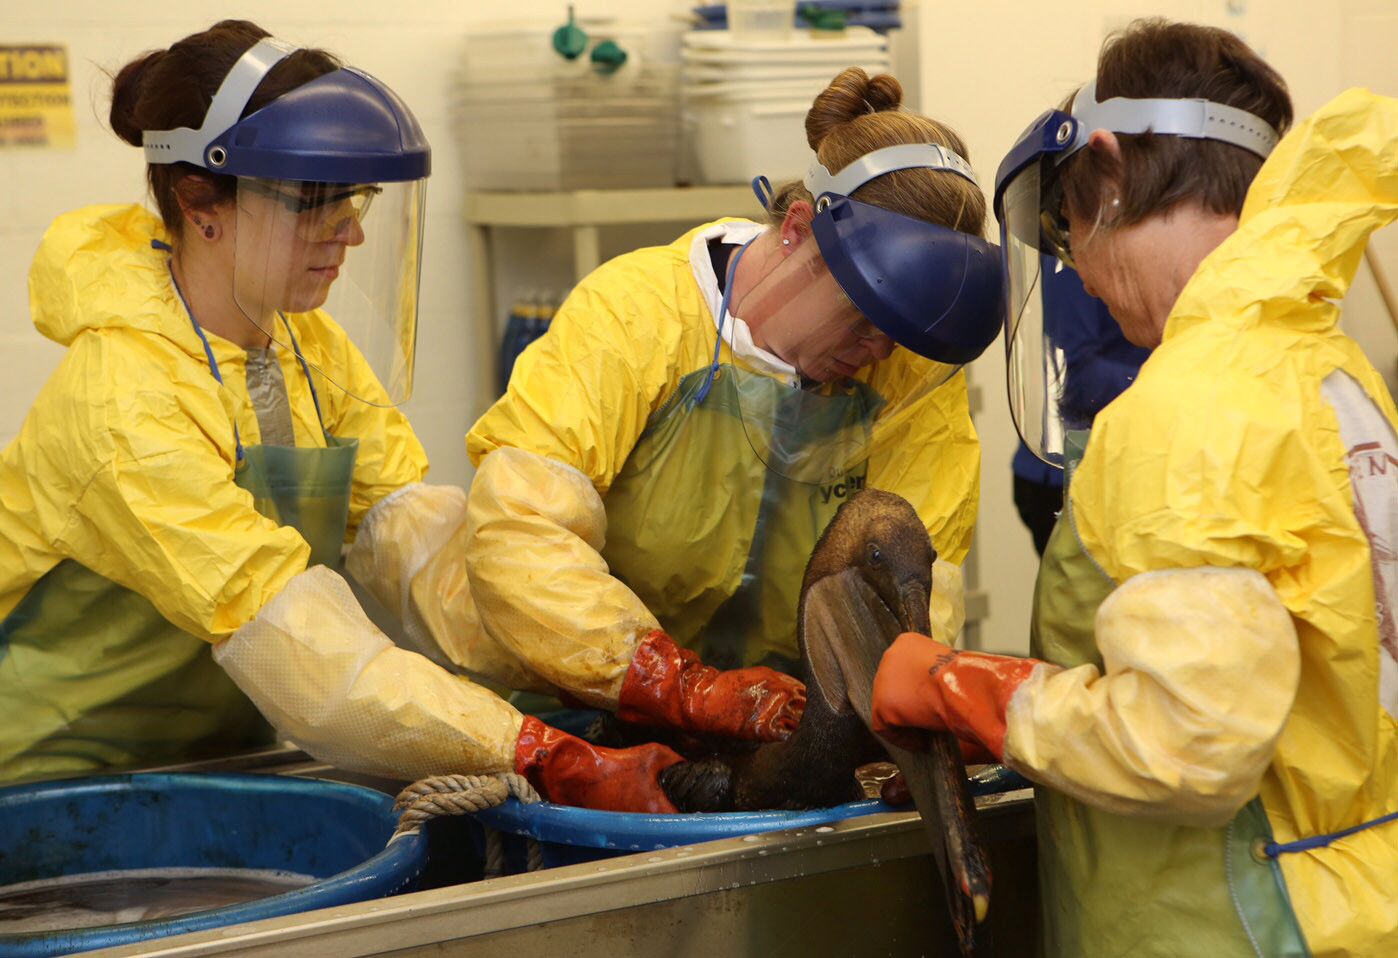 Workers at the Los Angeles Oiled Bird Care and Education Center work to clean an oil-covered pelican rescued from the spill at Refugio State Beach.